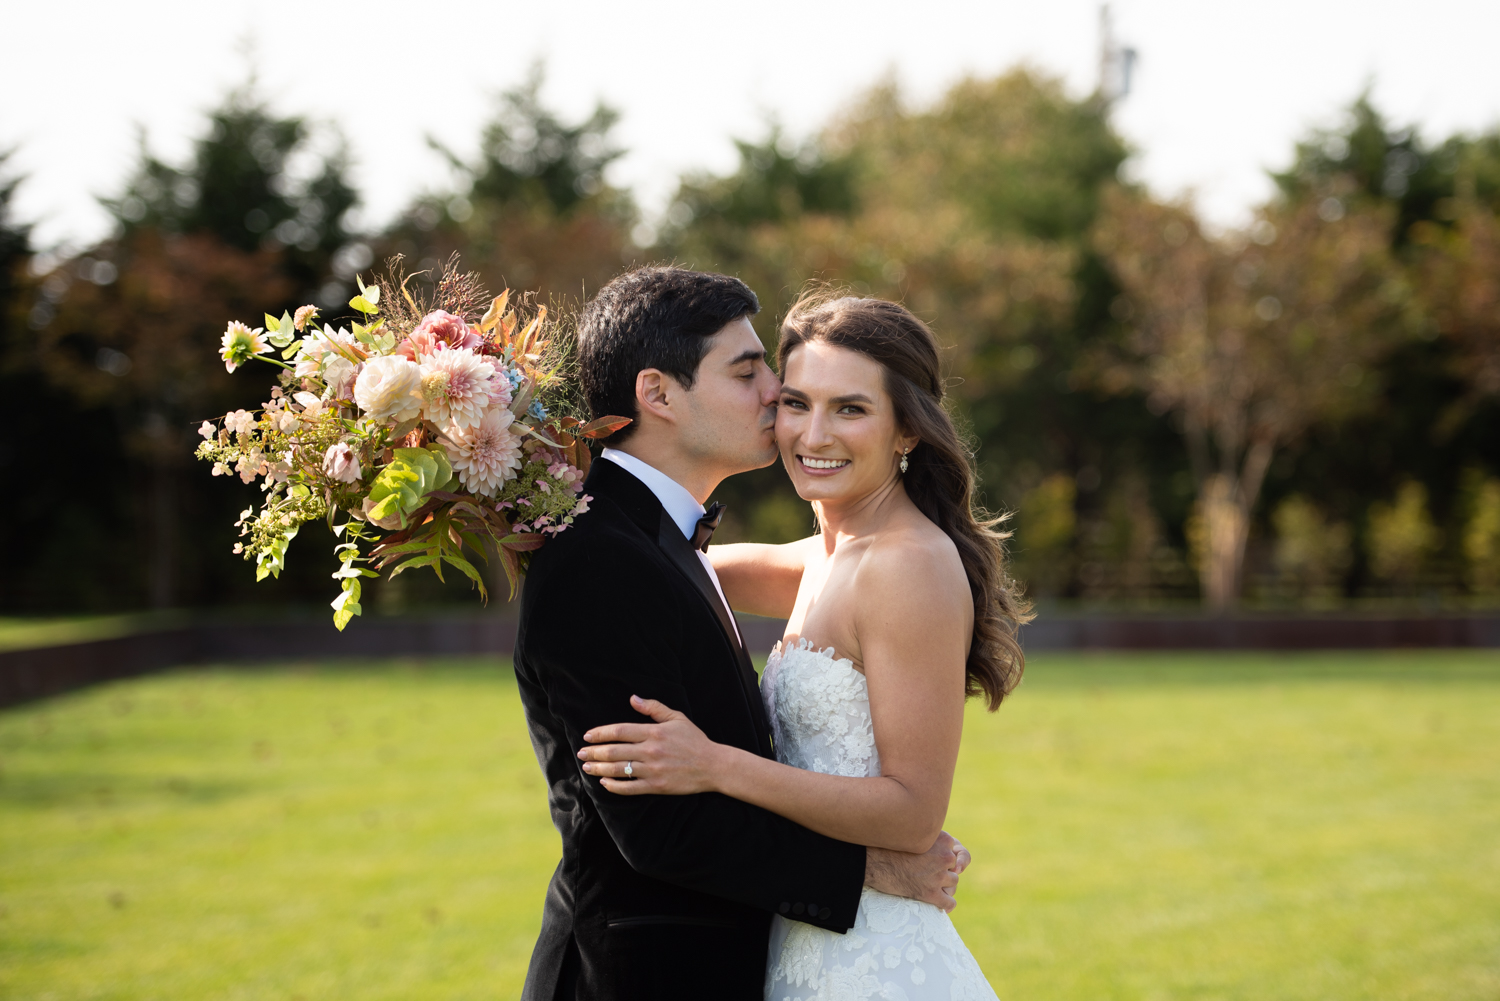 Bride and Groom, Intimate Autumn wedding in Watermill NY, planned by In Any Event NY